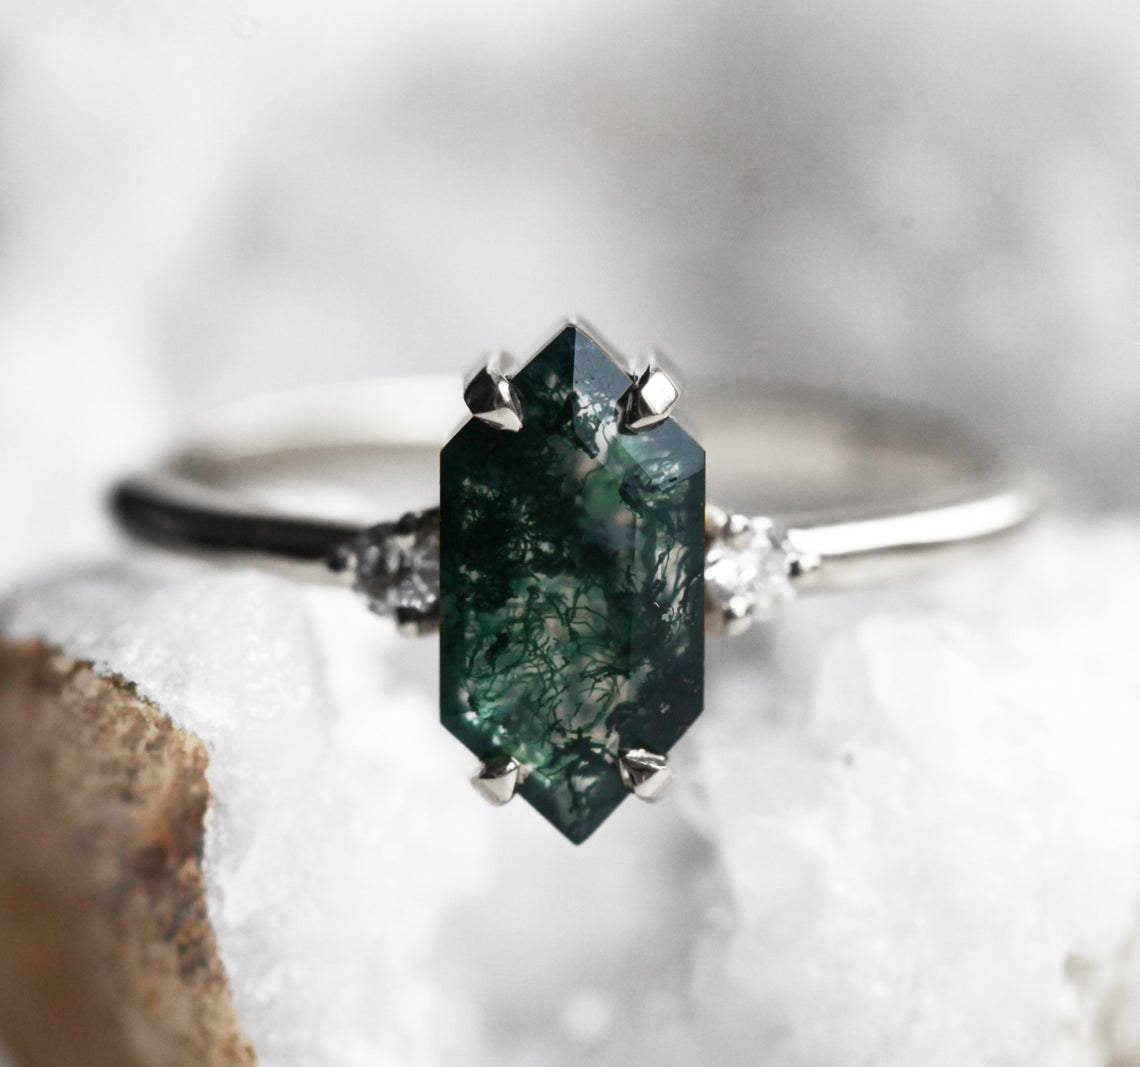 Hexagon Moss Agate, Platinum Ring Set with 2 Side White Diamonds